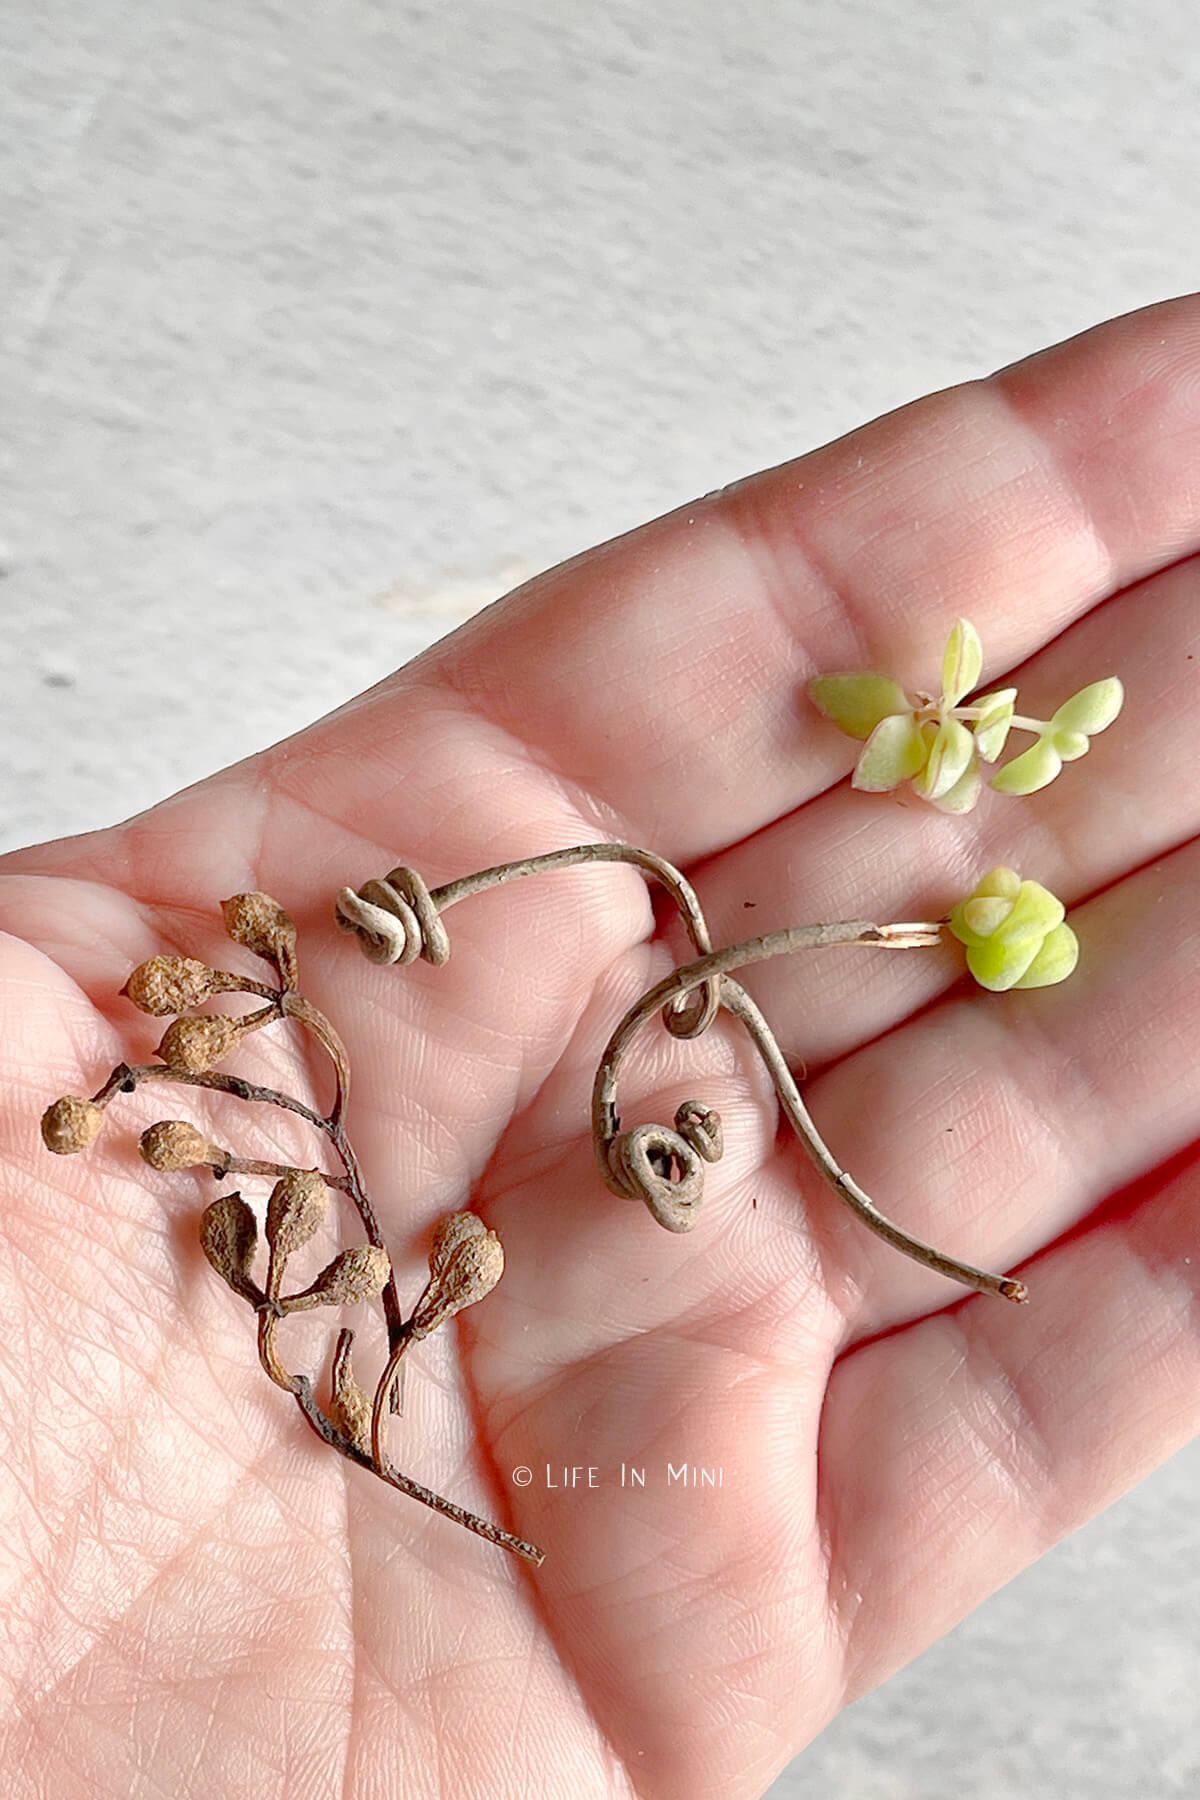 A hand holding small plants, vines and twigs